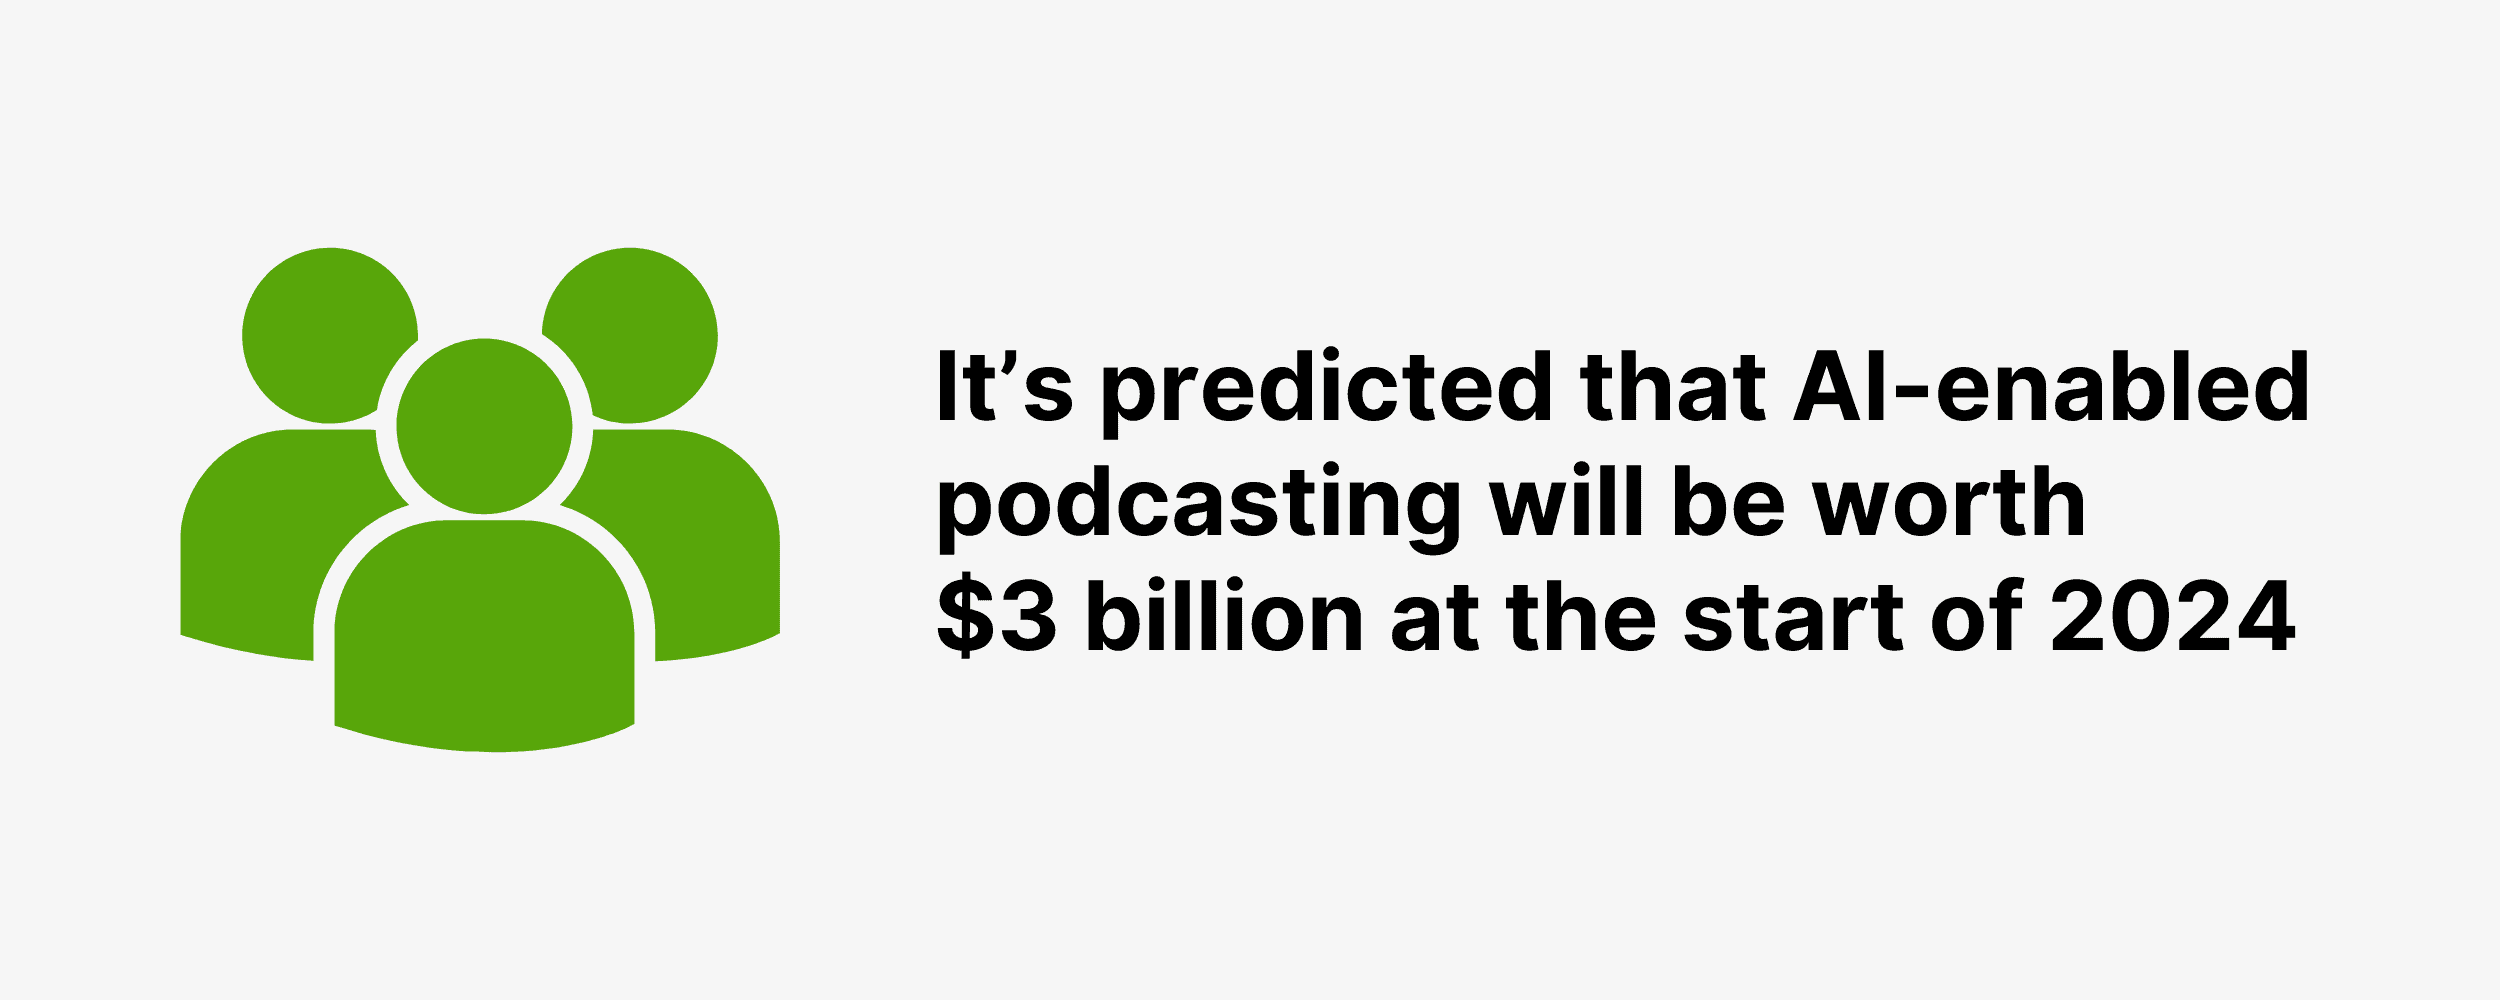 It’s predicted that AI-enabled podcasting will be worth $3 billion at the start of 2024